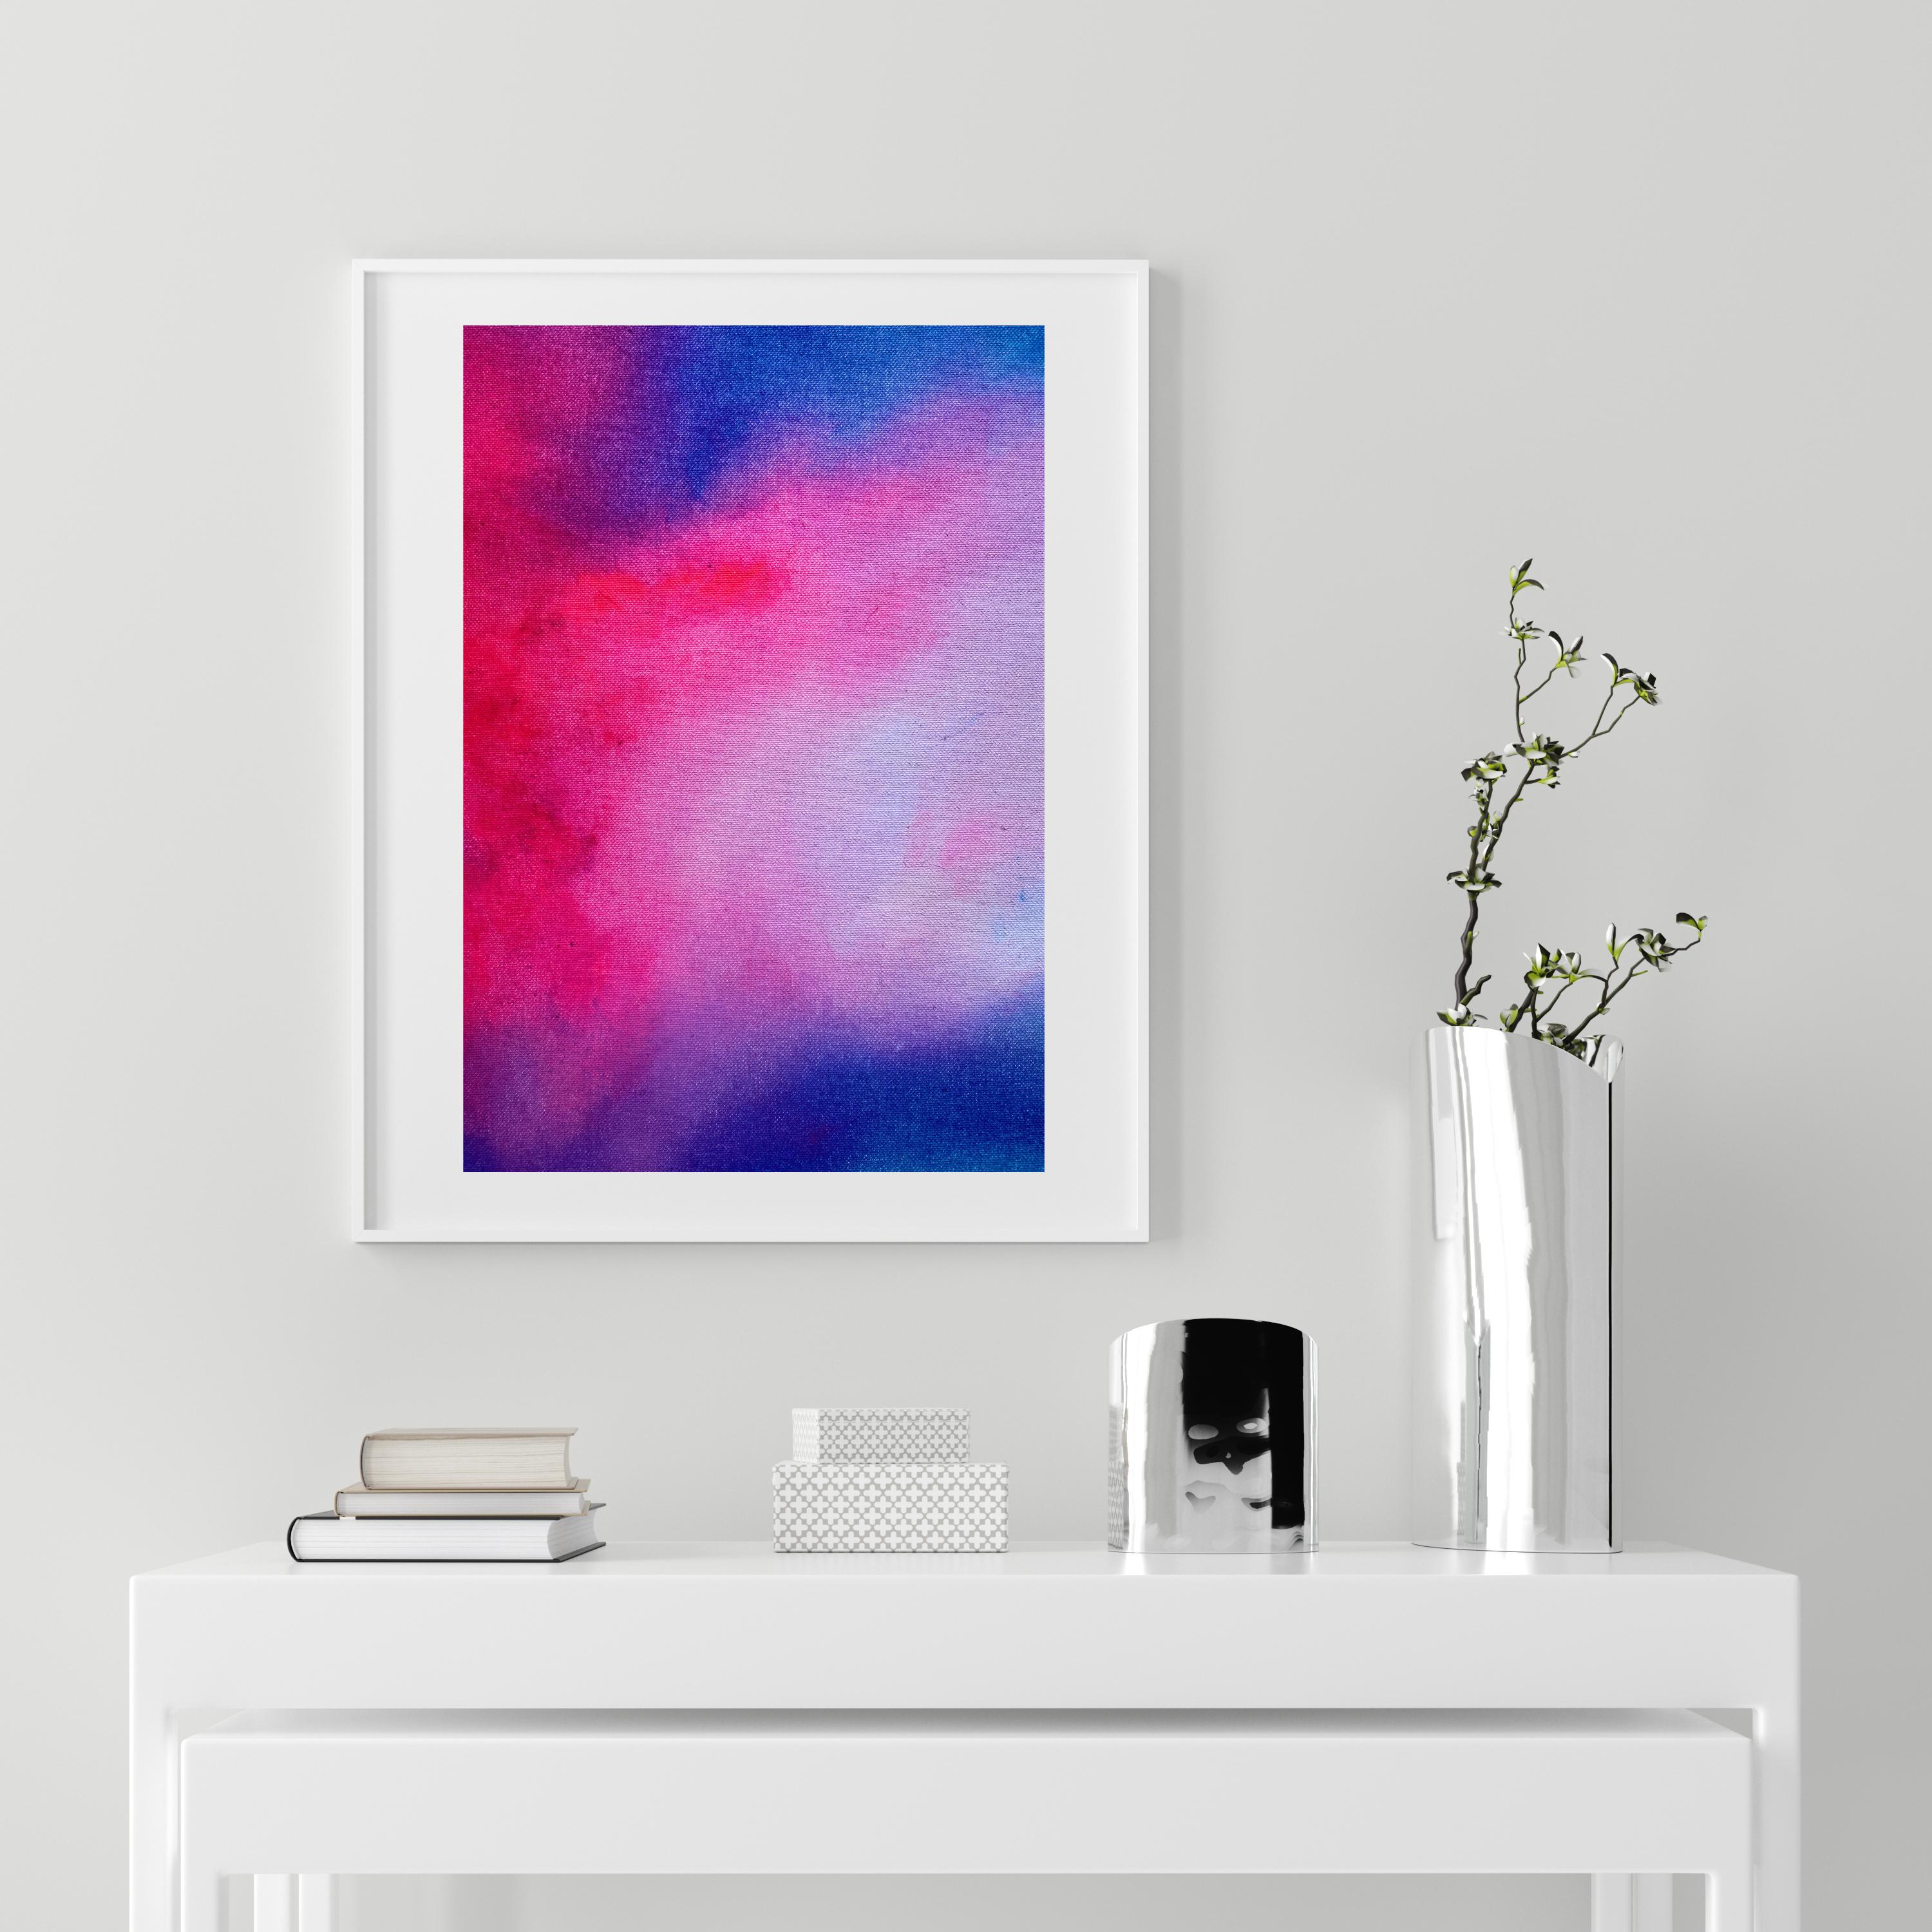 Gentle Blends Blue & Pink no2 small abstract on canvas framed in white mat board - Painting by Kathleen Rhee